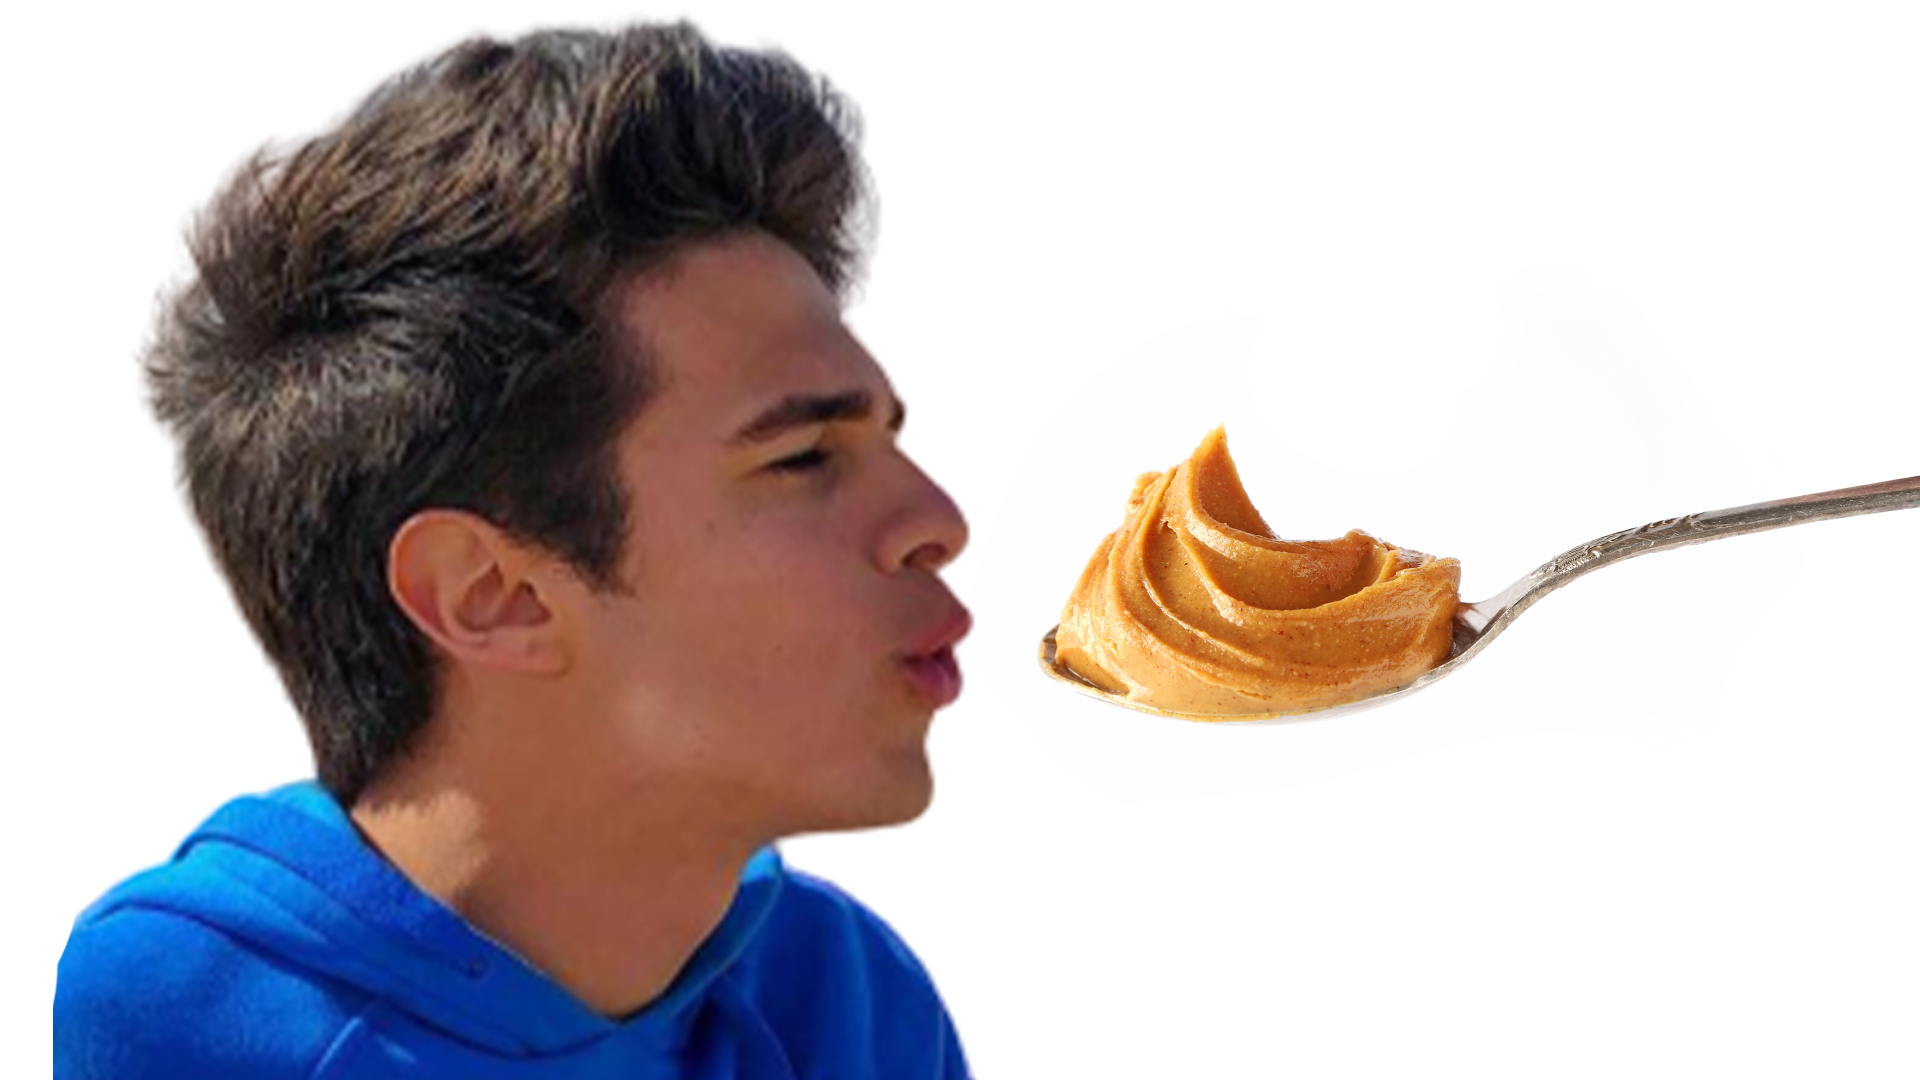 Brent is faced with a spoonful of peanut butter